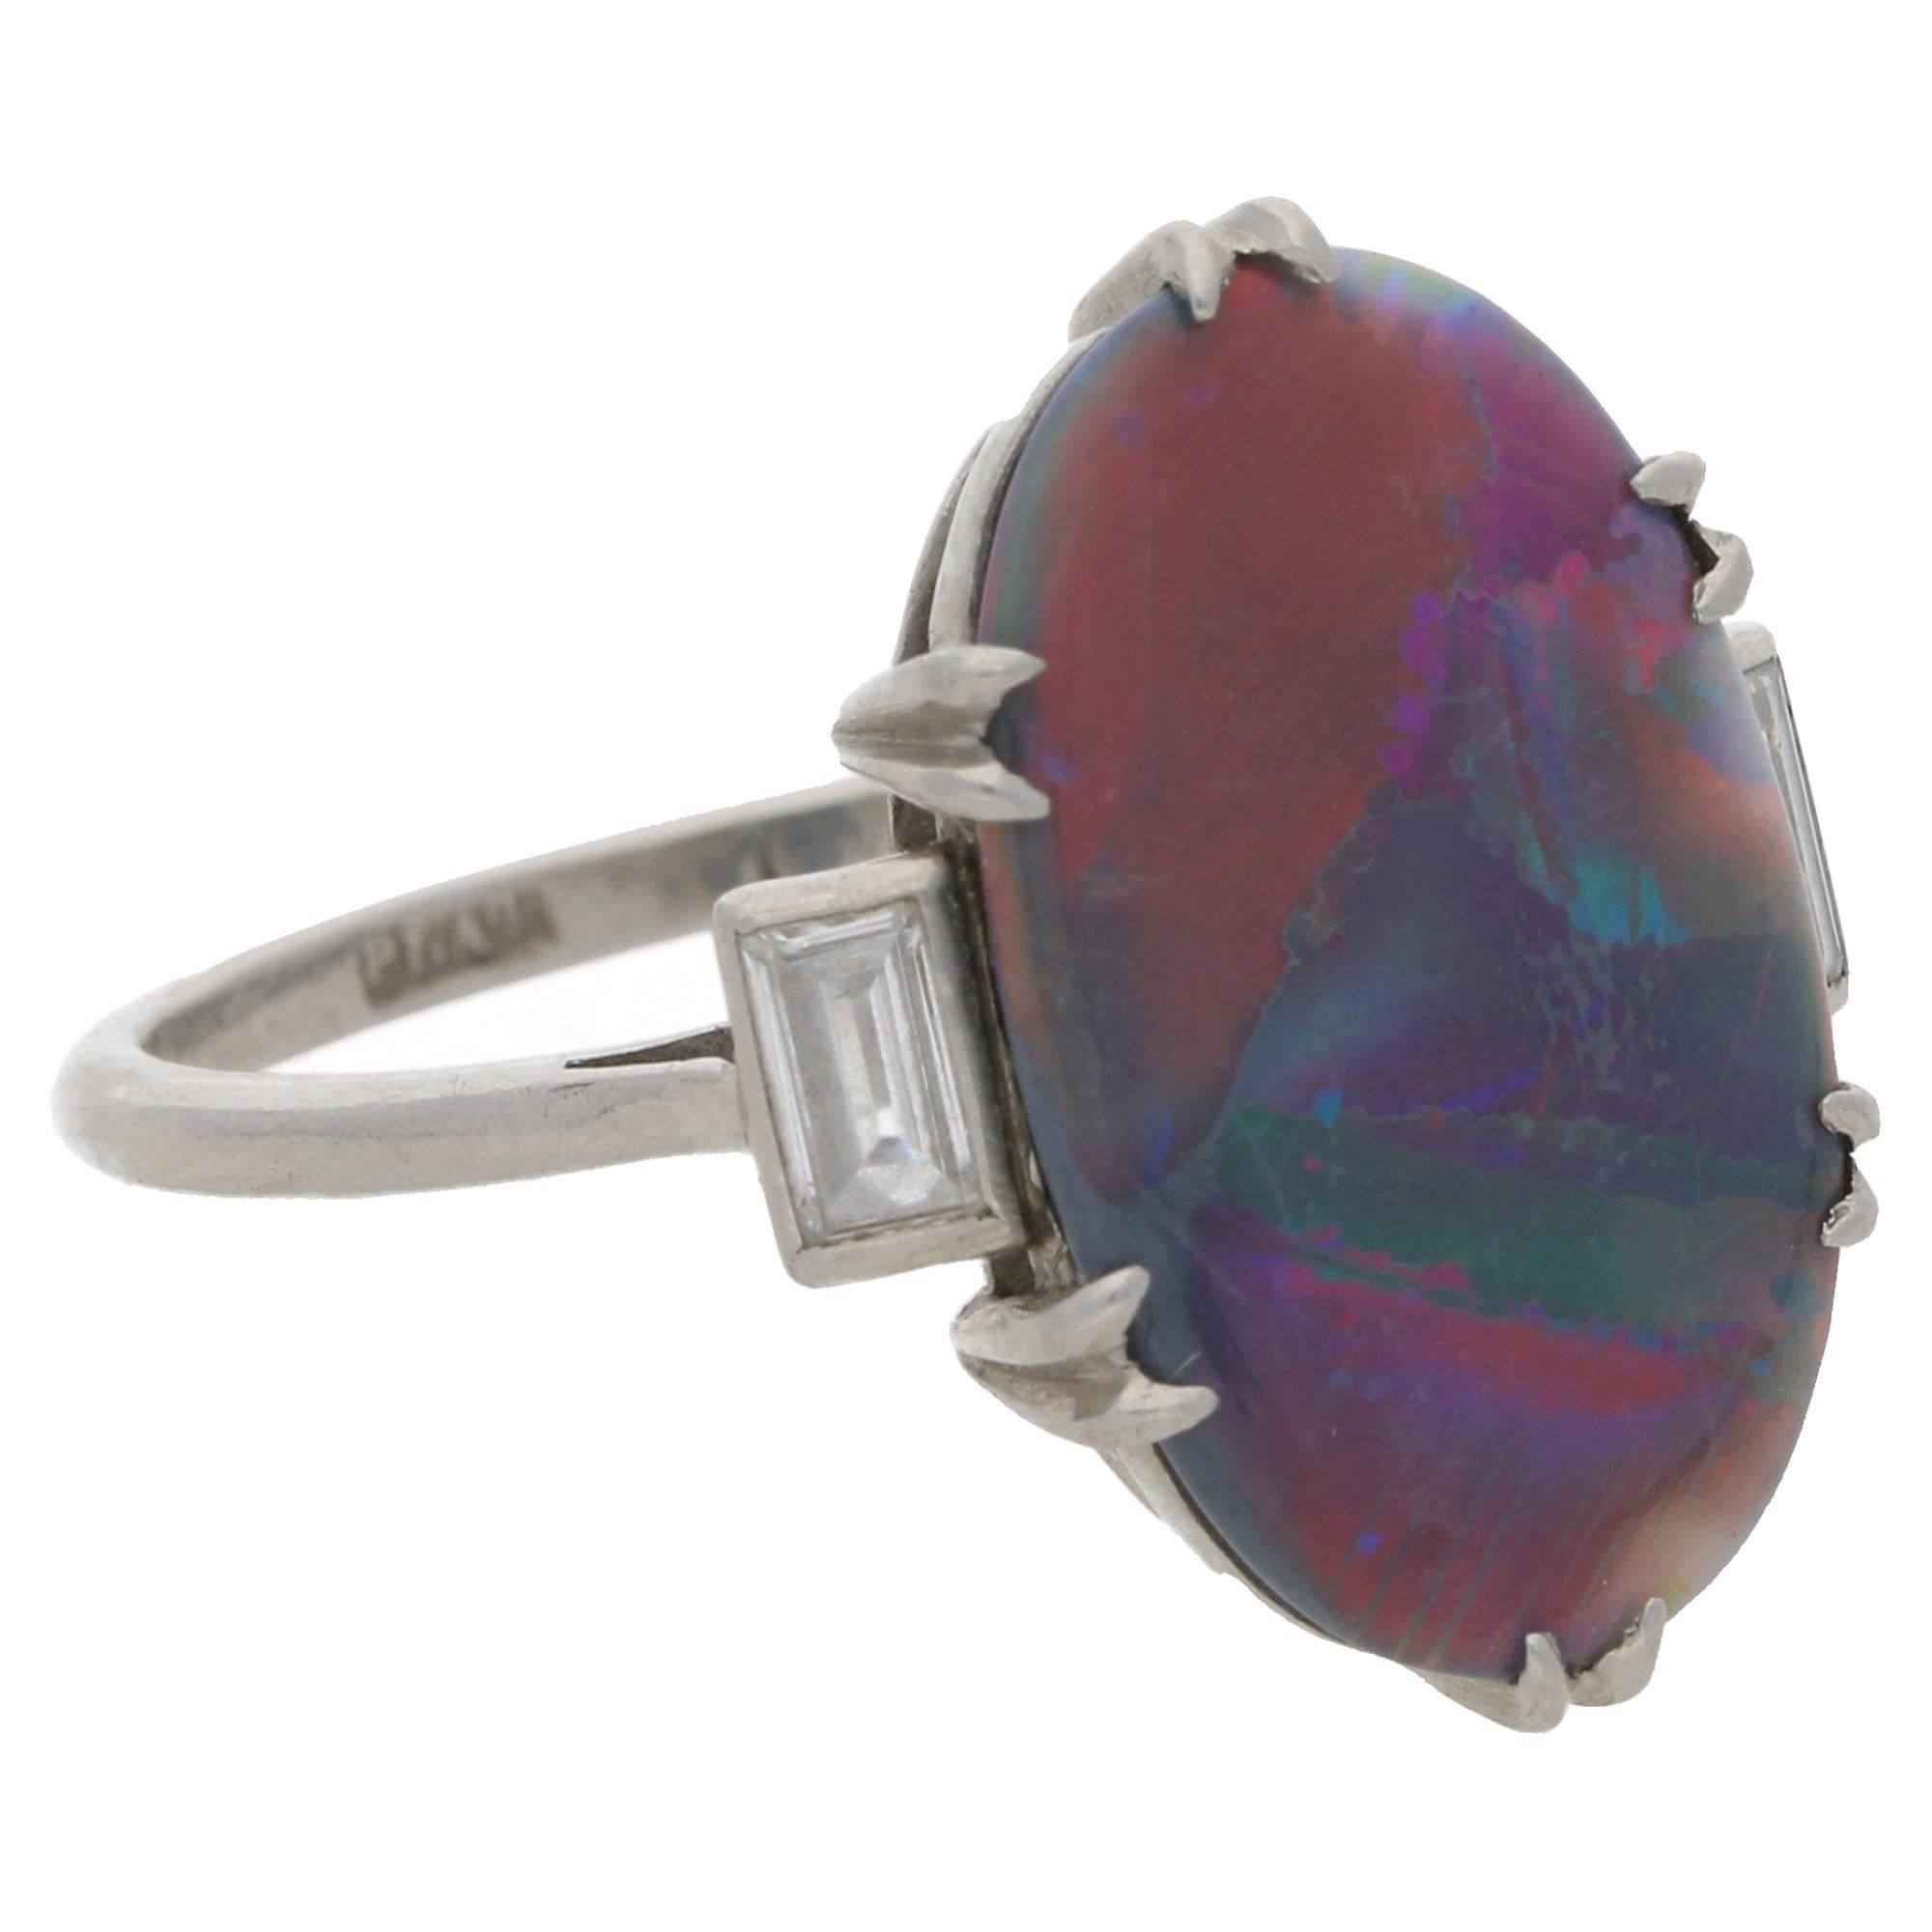 An impressive Art Deco harlequin black opal and diamond ring in platinum, circa 1935. The ring is set with an oval-shaped cabochon natural un-enhanced harlequin black opal in an open-back double talon claw setting with approximately 1.50 carats,